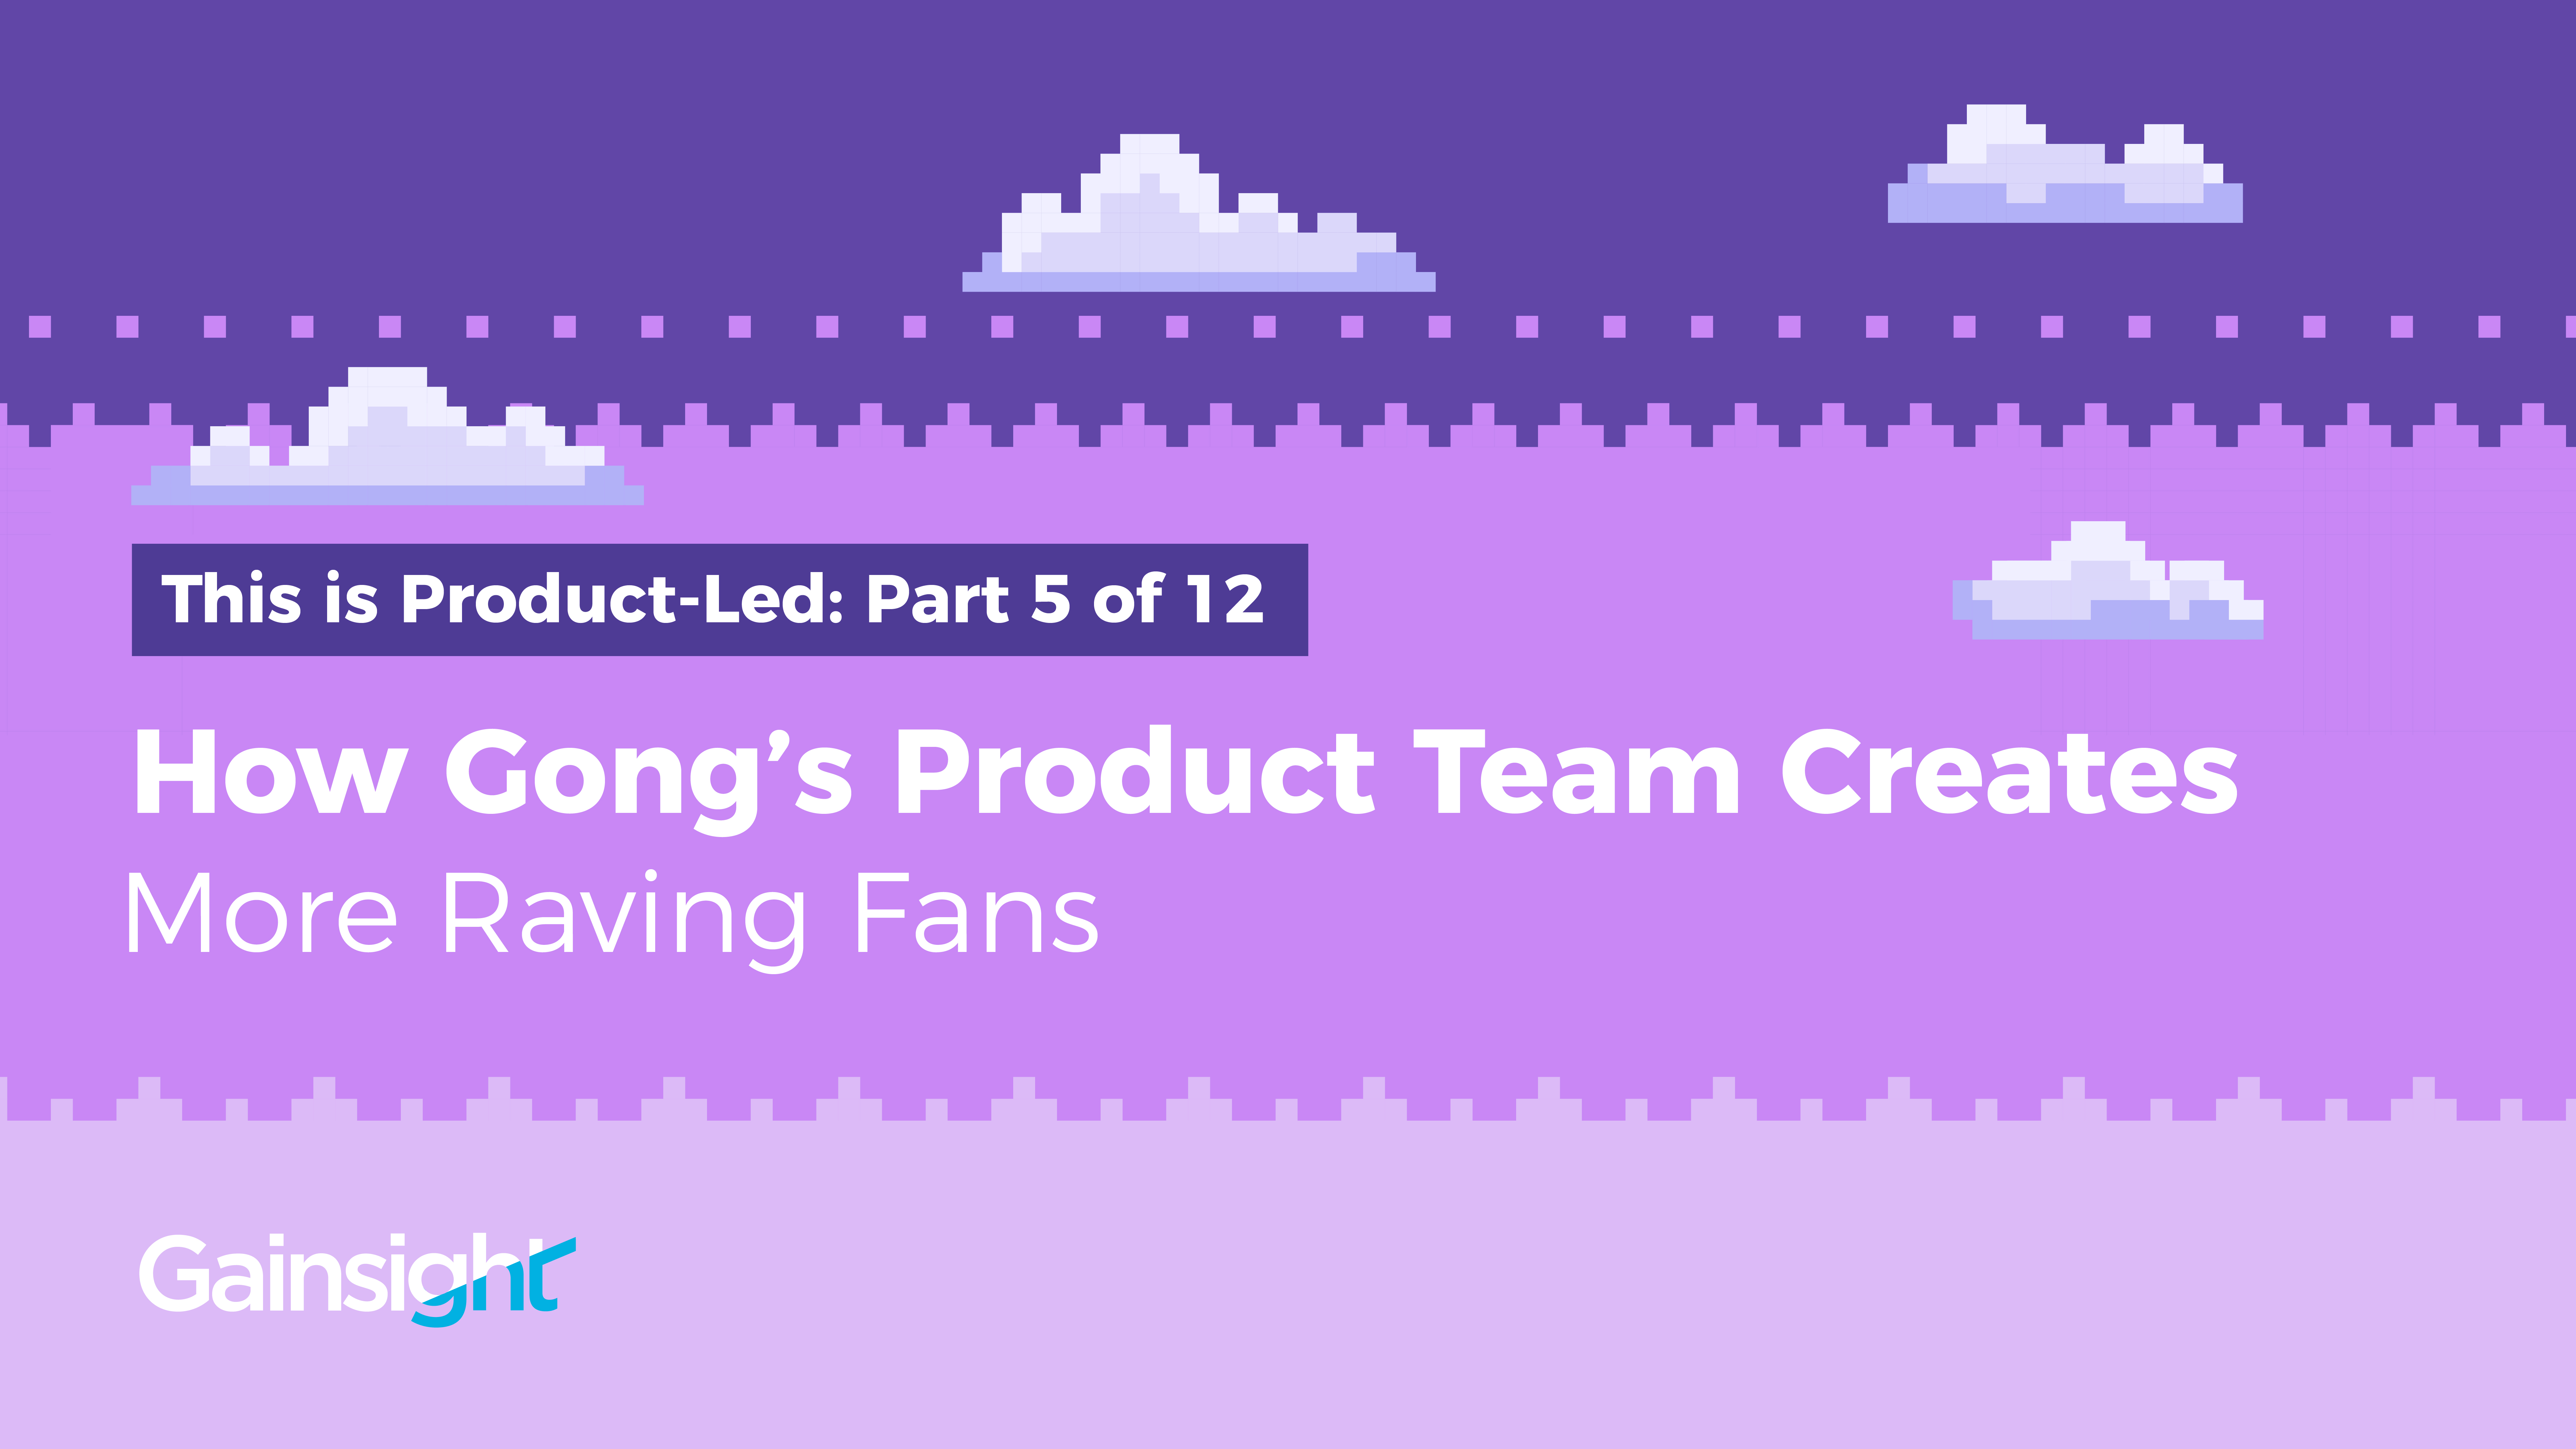 How Gong’s Product Team Creates More Raving Fans Image